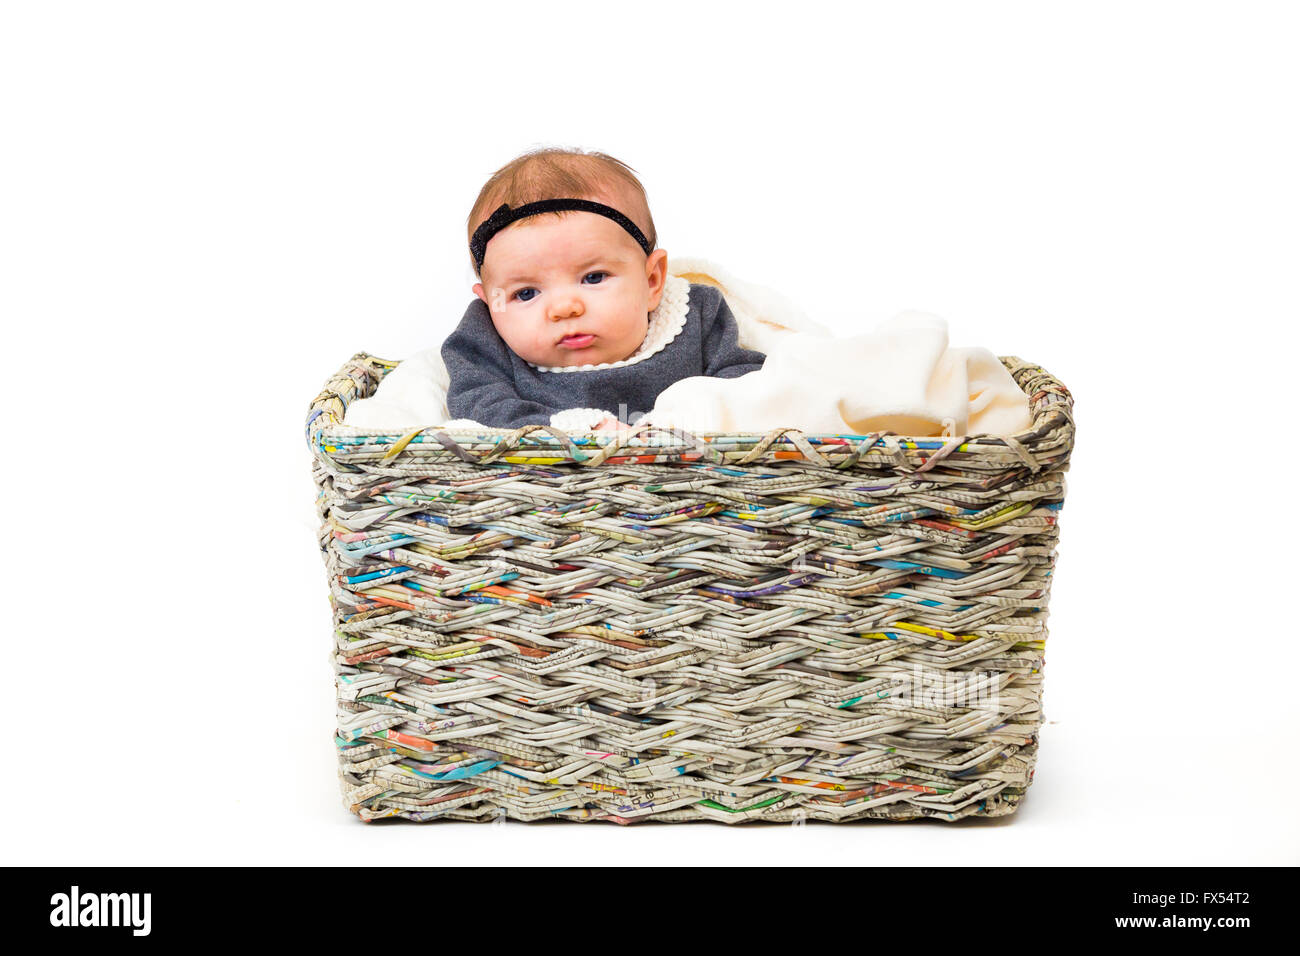 Young newborn baby wearing a cute outfit posing for portraits in the studio with a white background sitting inside a basket with Stock Photo